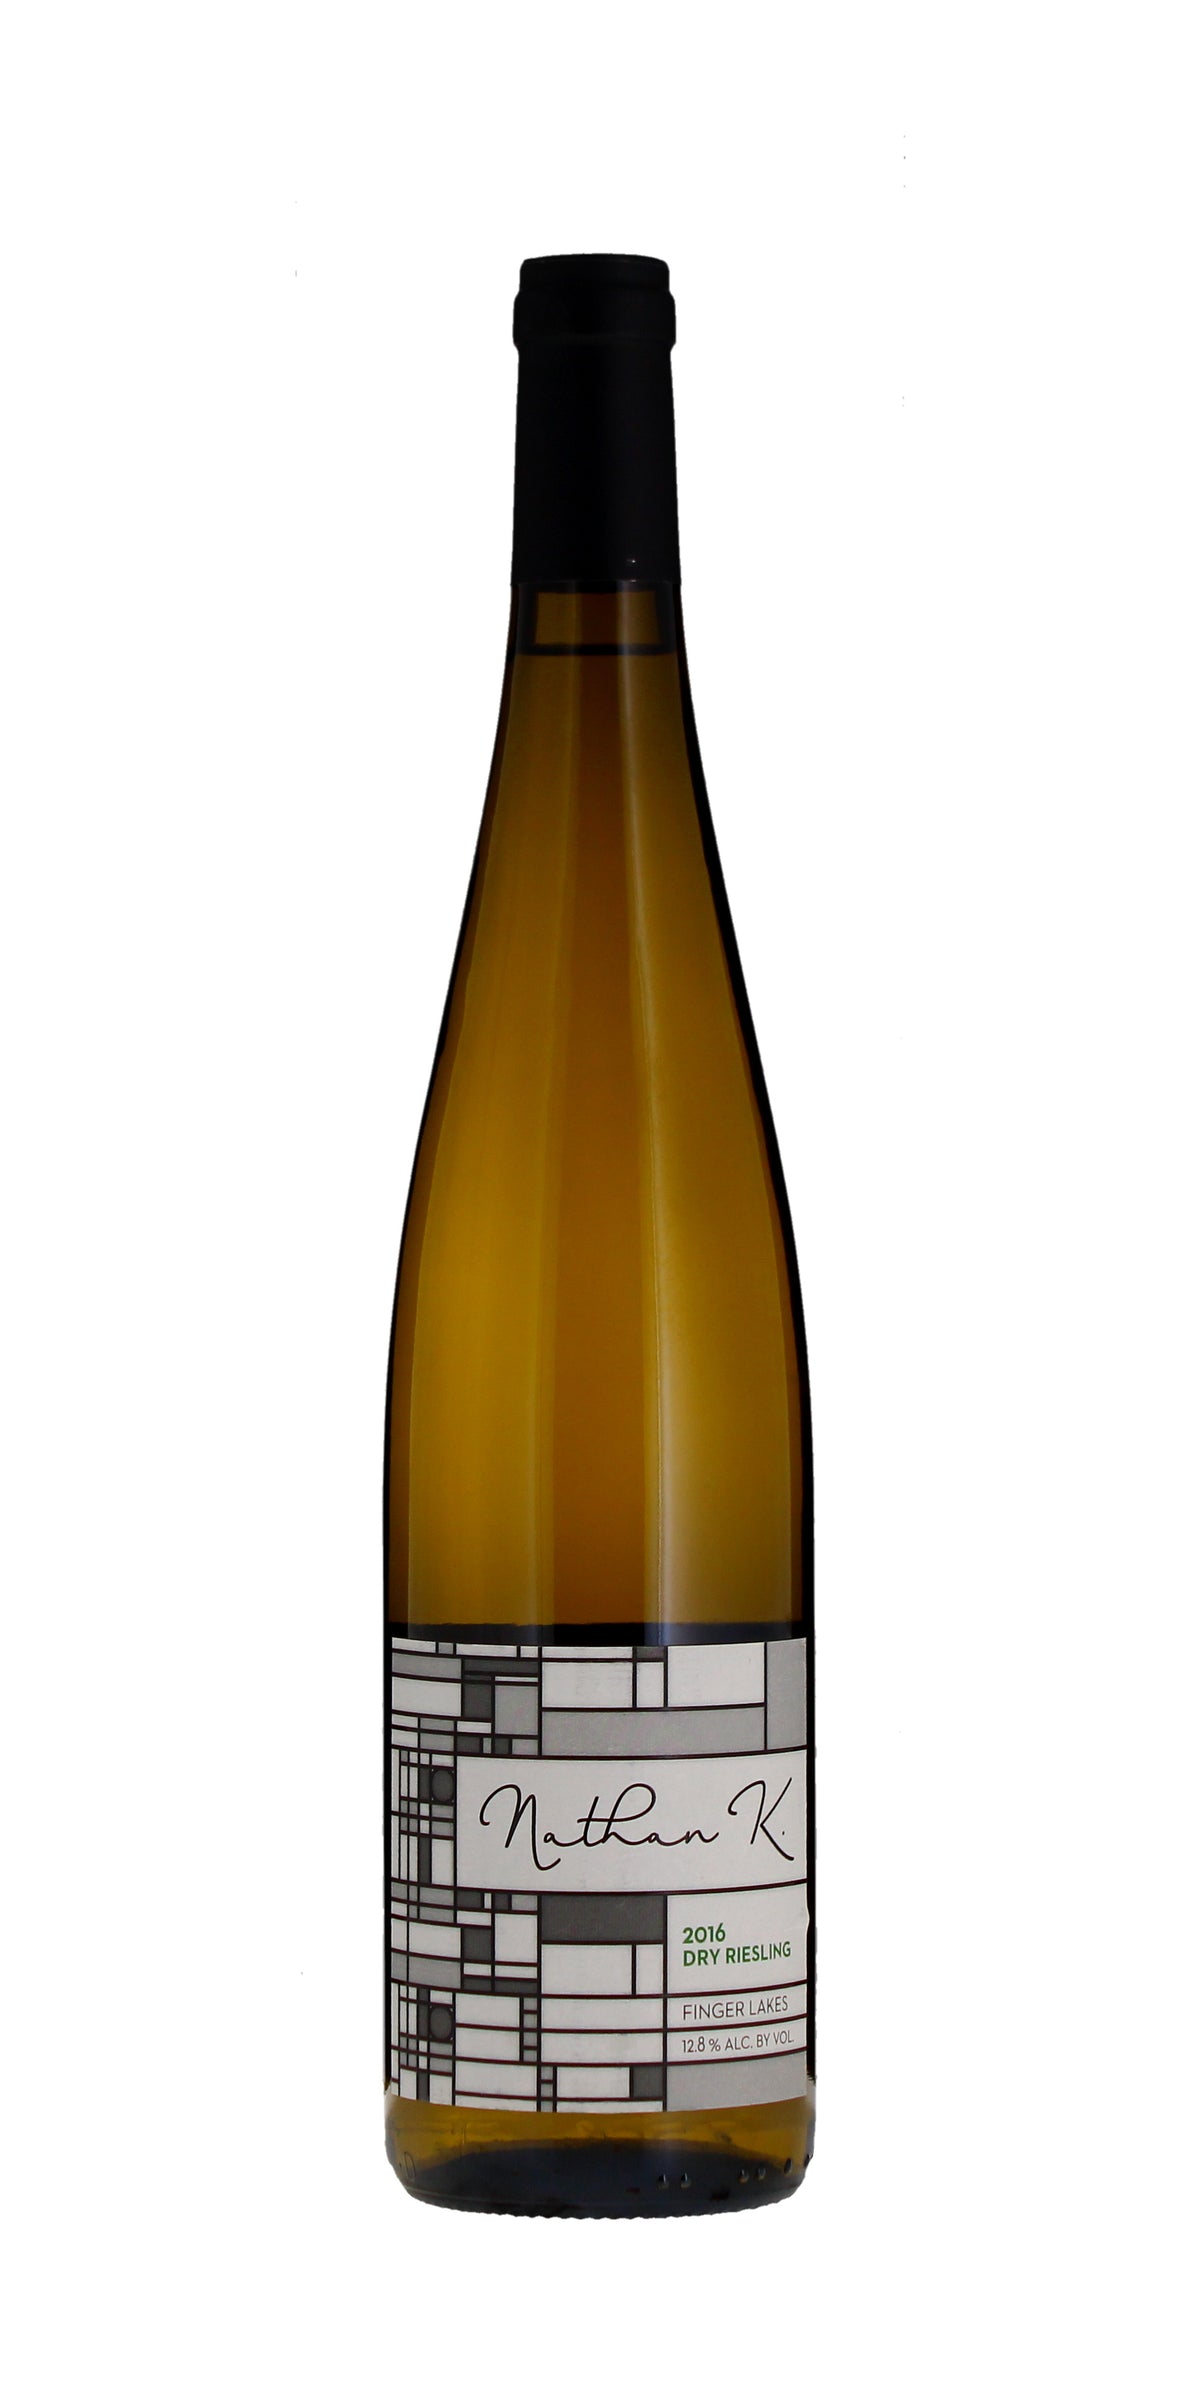 Nathan Kendall Dry Riesling, Finger Lakes 2016